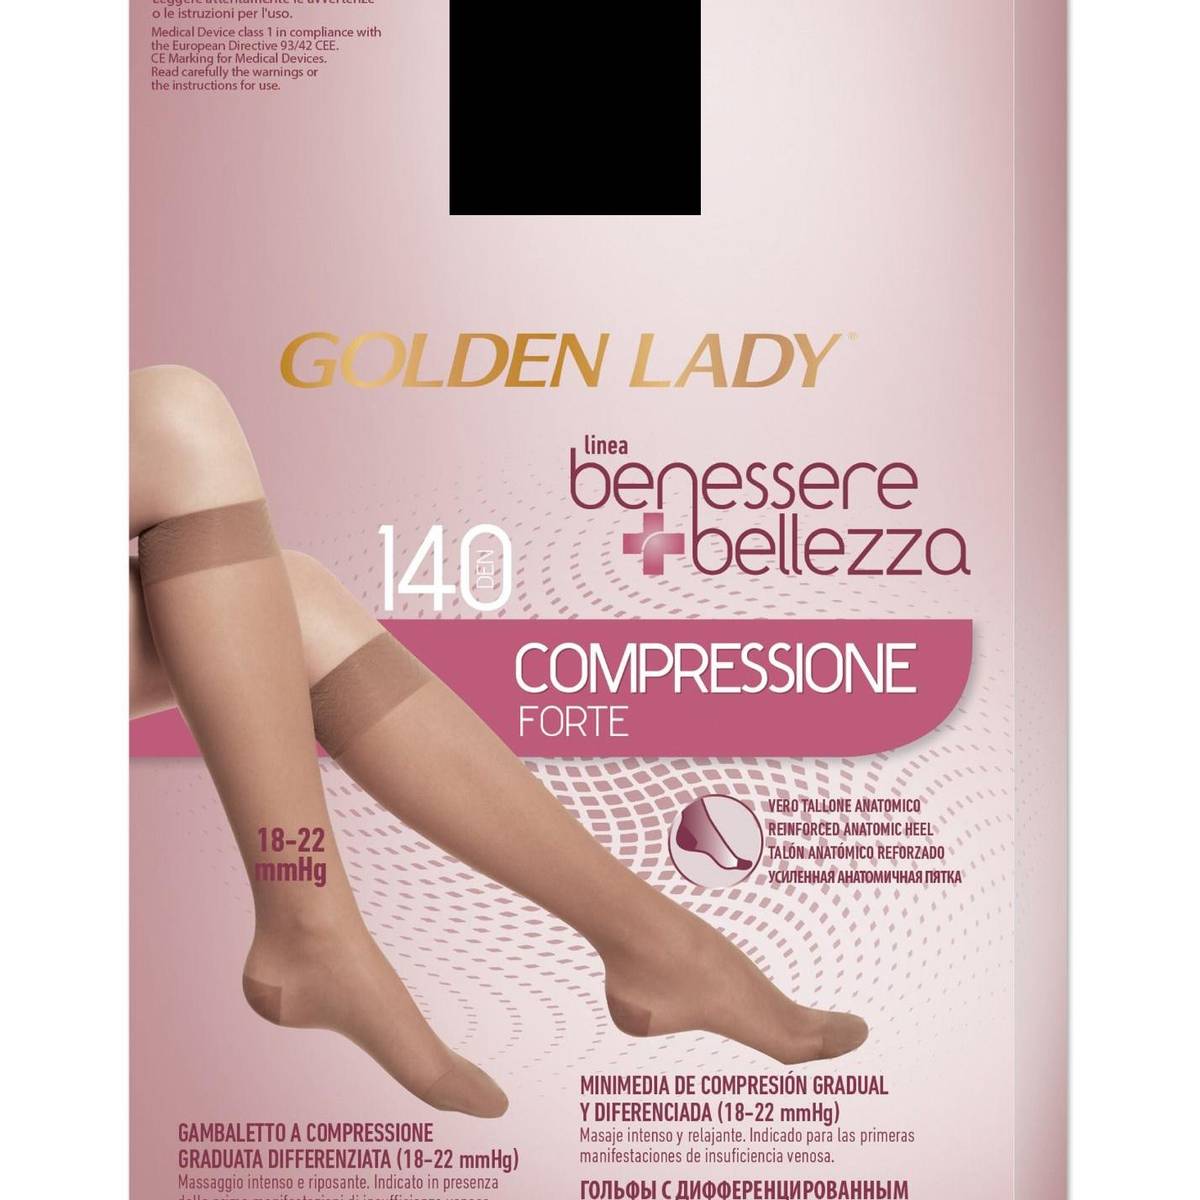 Compression stockings in skin tone and black